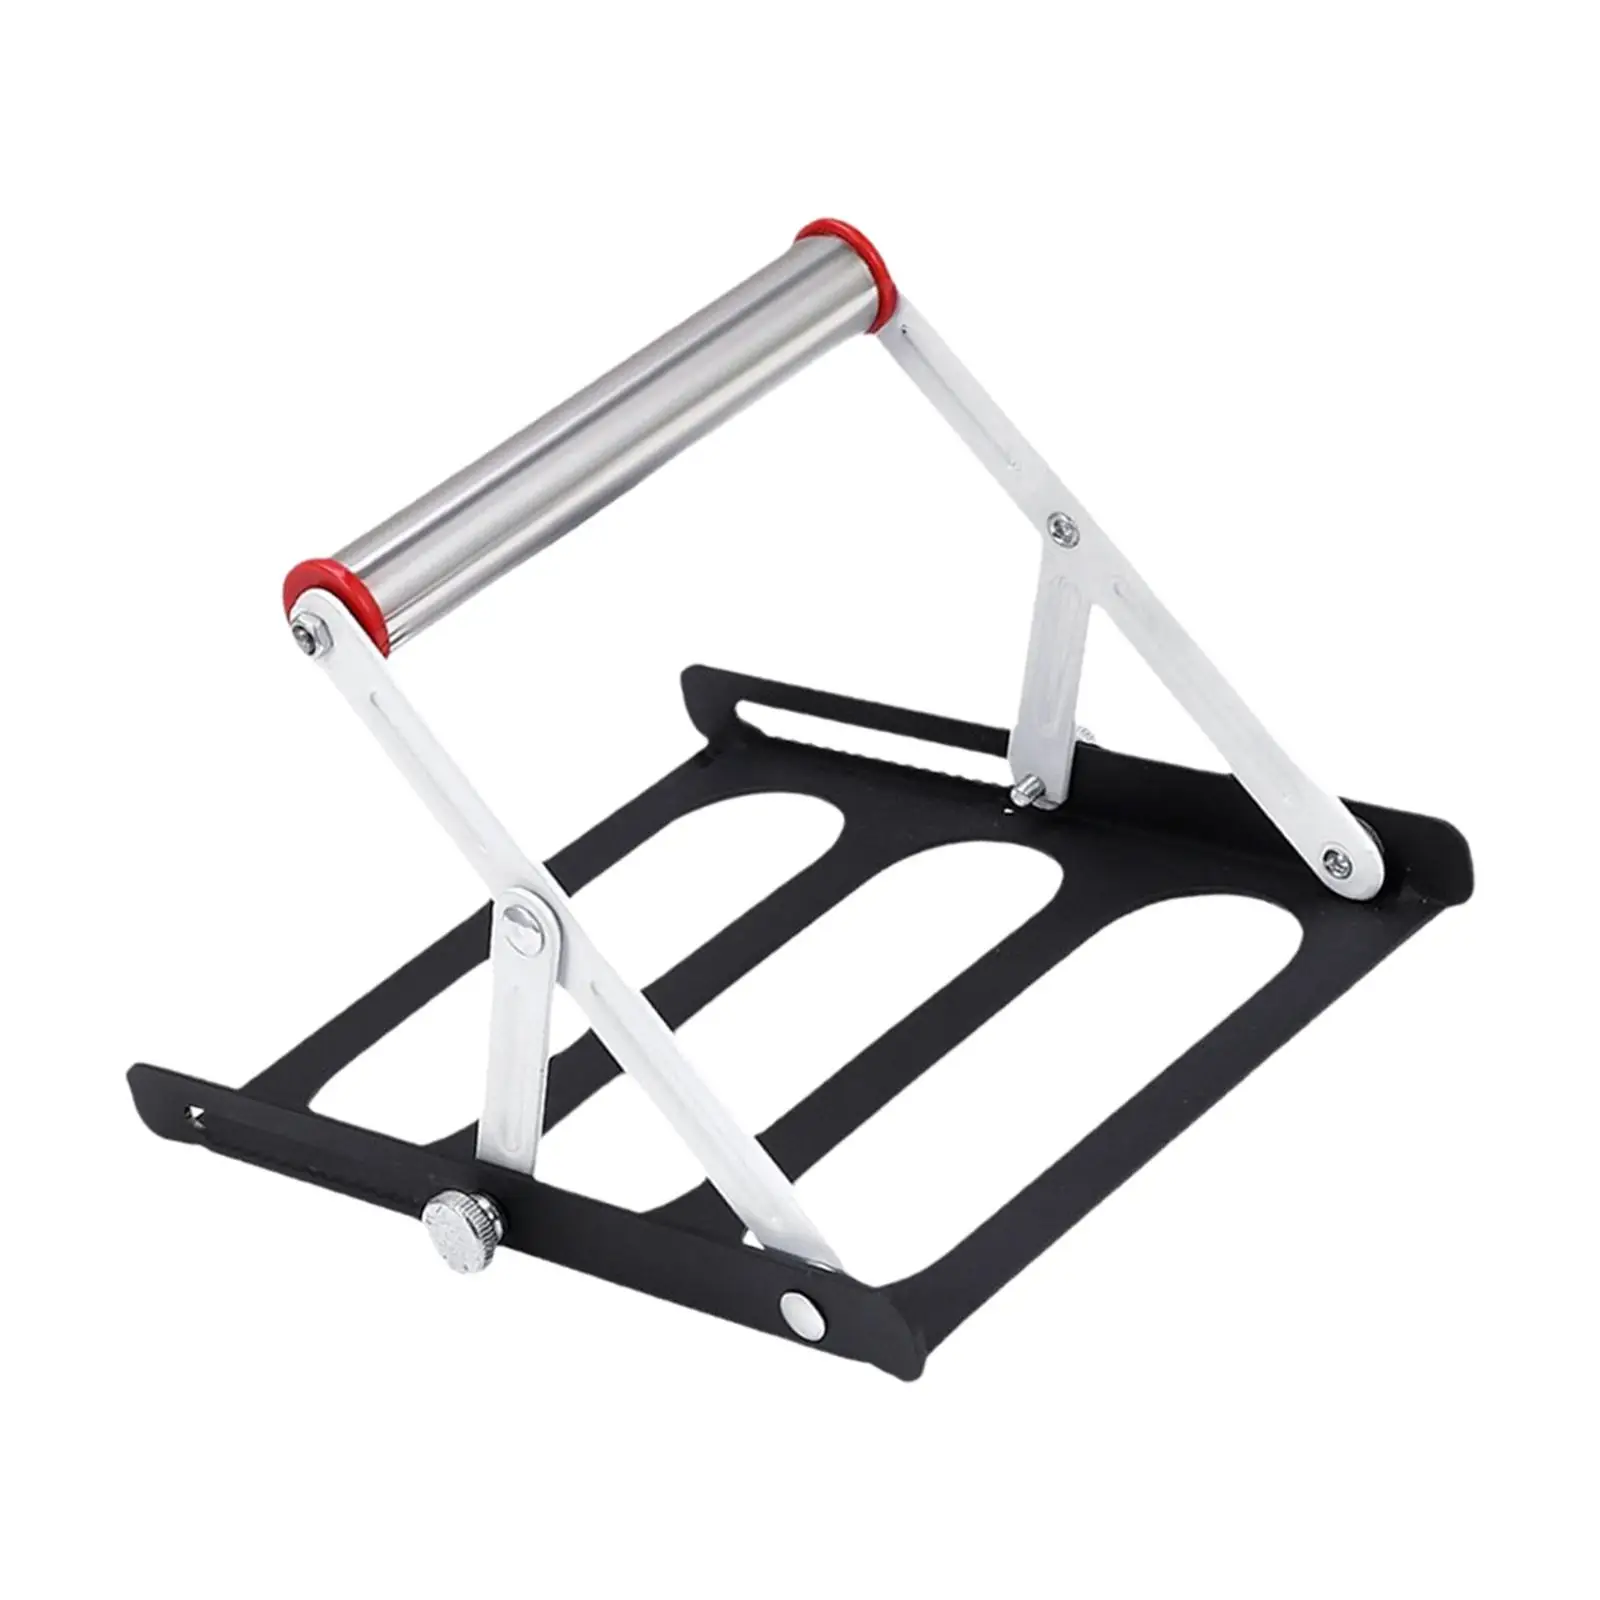 Cutting Machine Support Stand, Table Saw Stand, Foldable Portable Material Support Stand for Professional